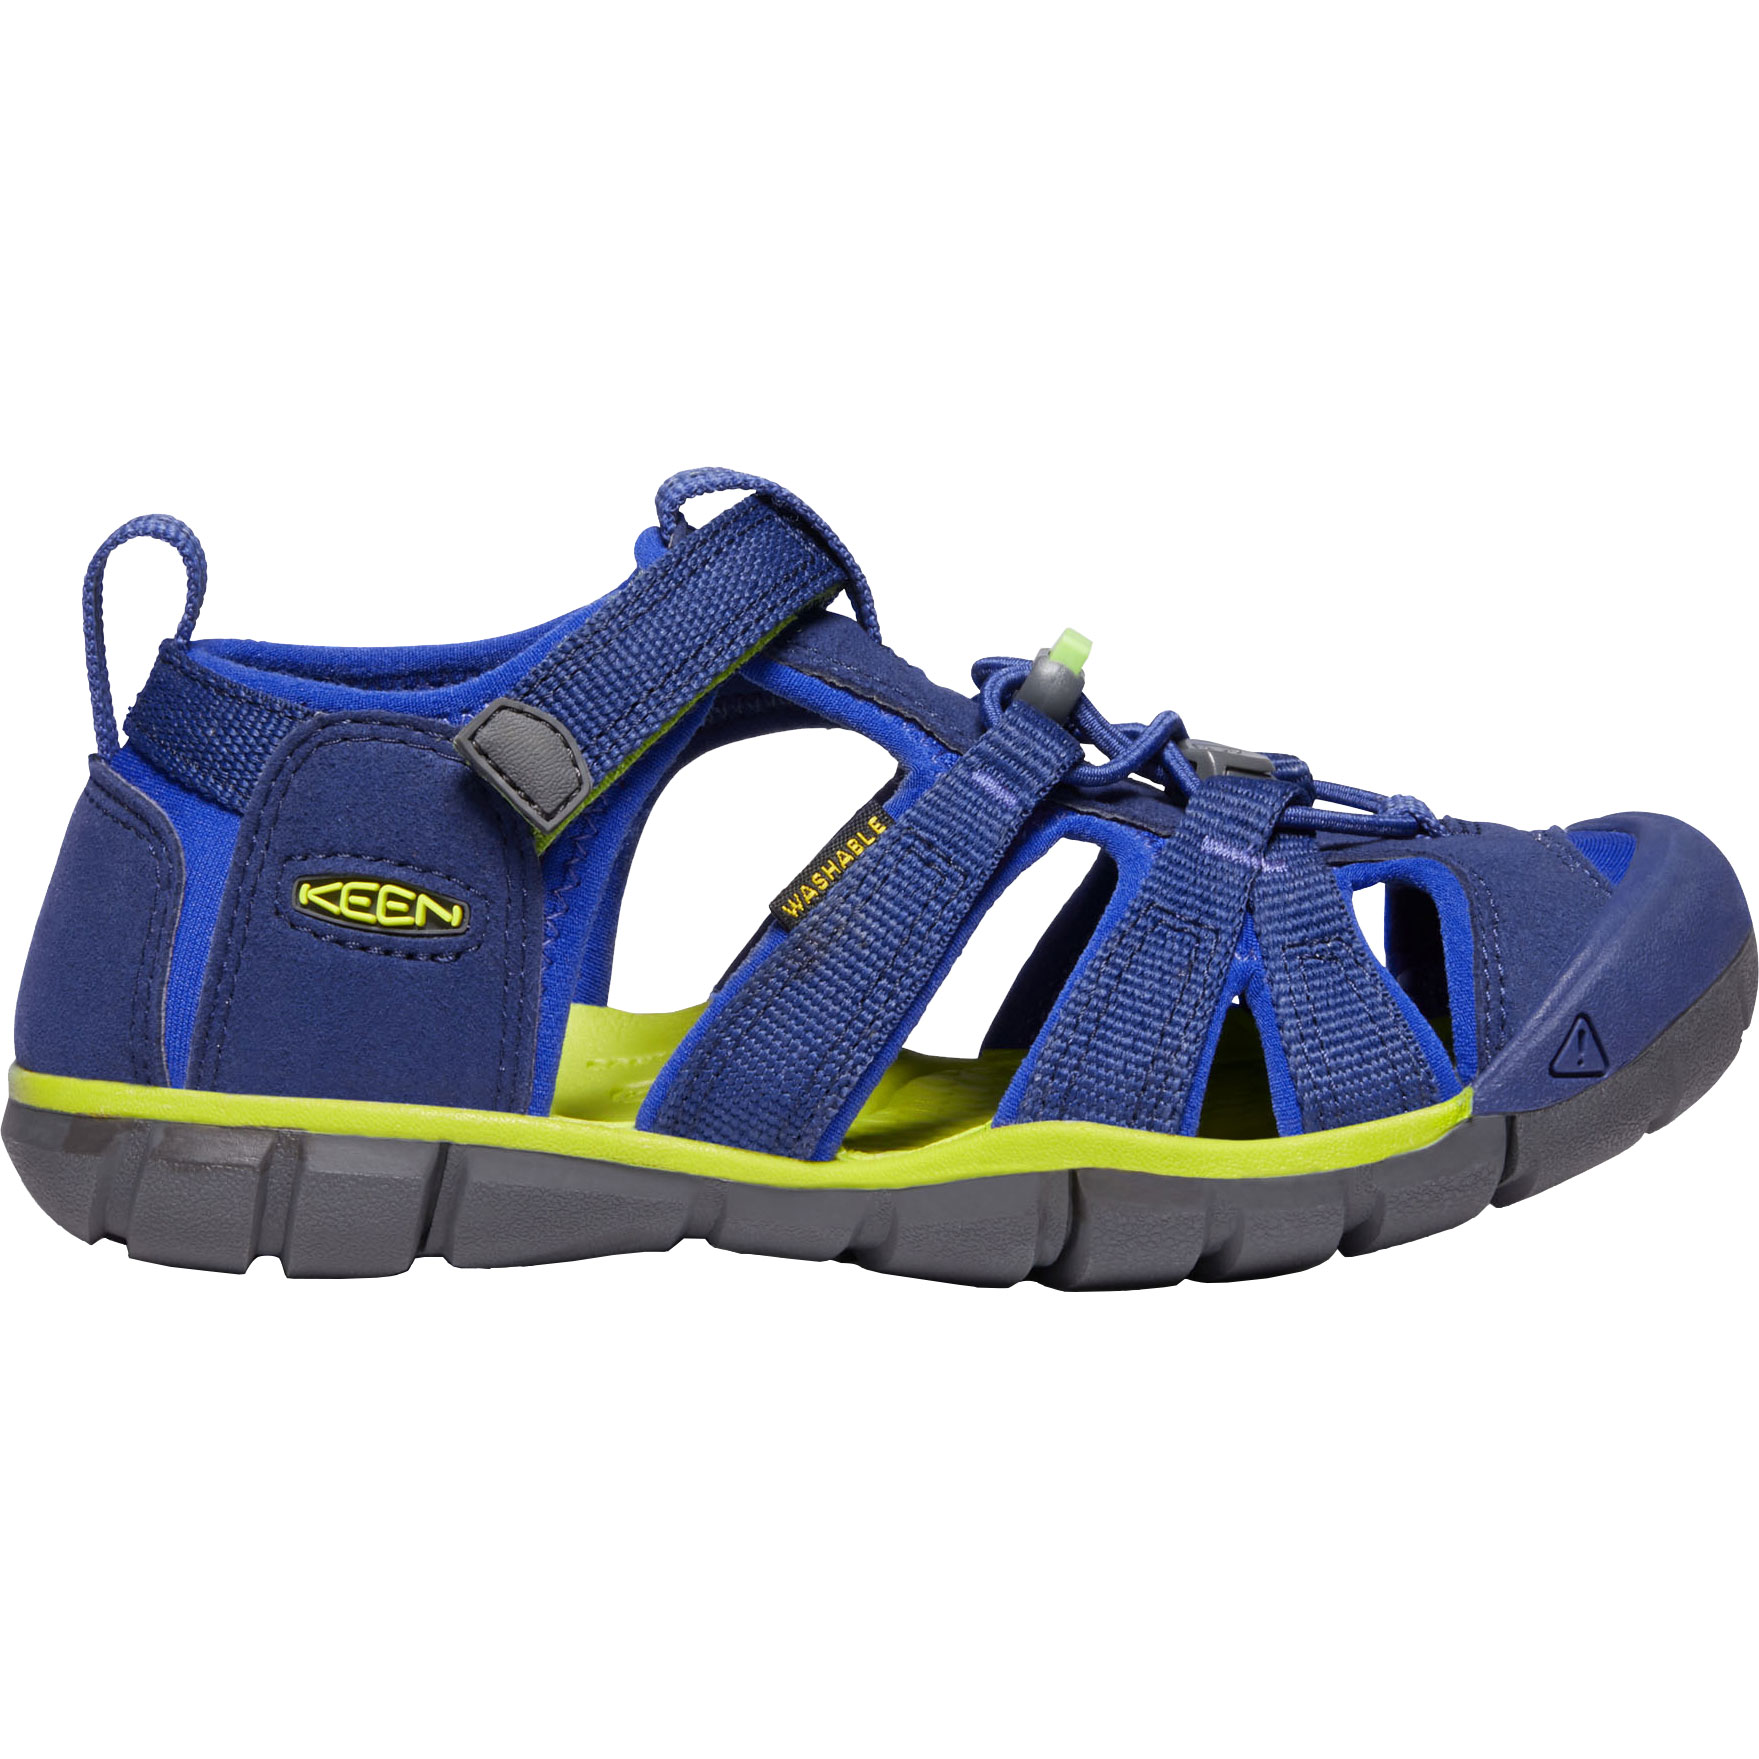 Picture of KEEN Seacamp II CNX Youth Sandal - Blue Depths / Chartreuse